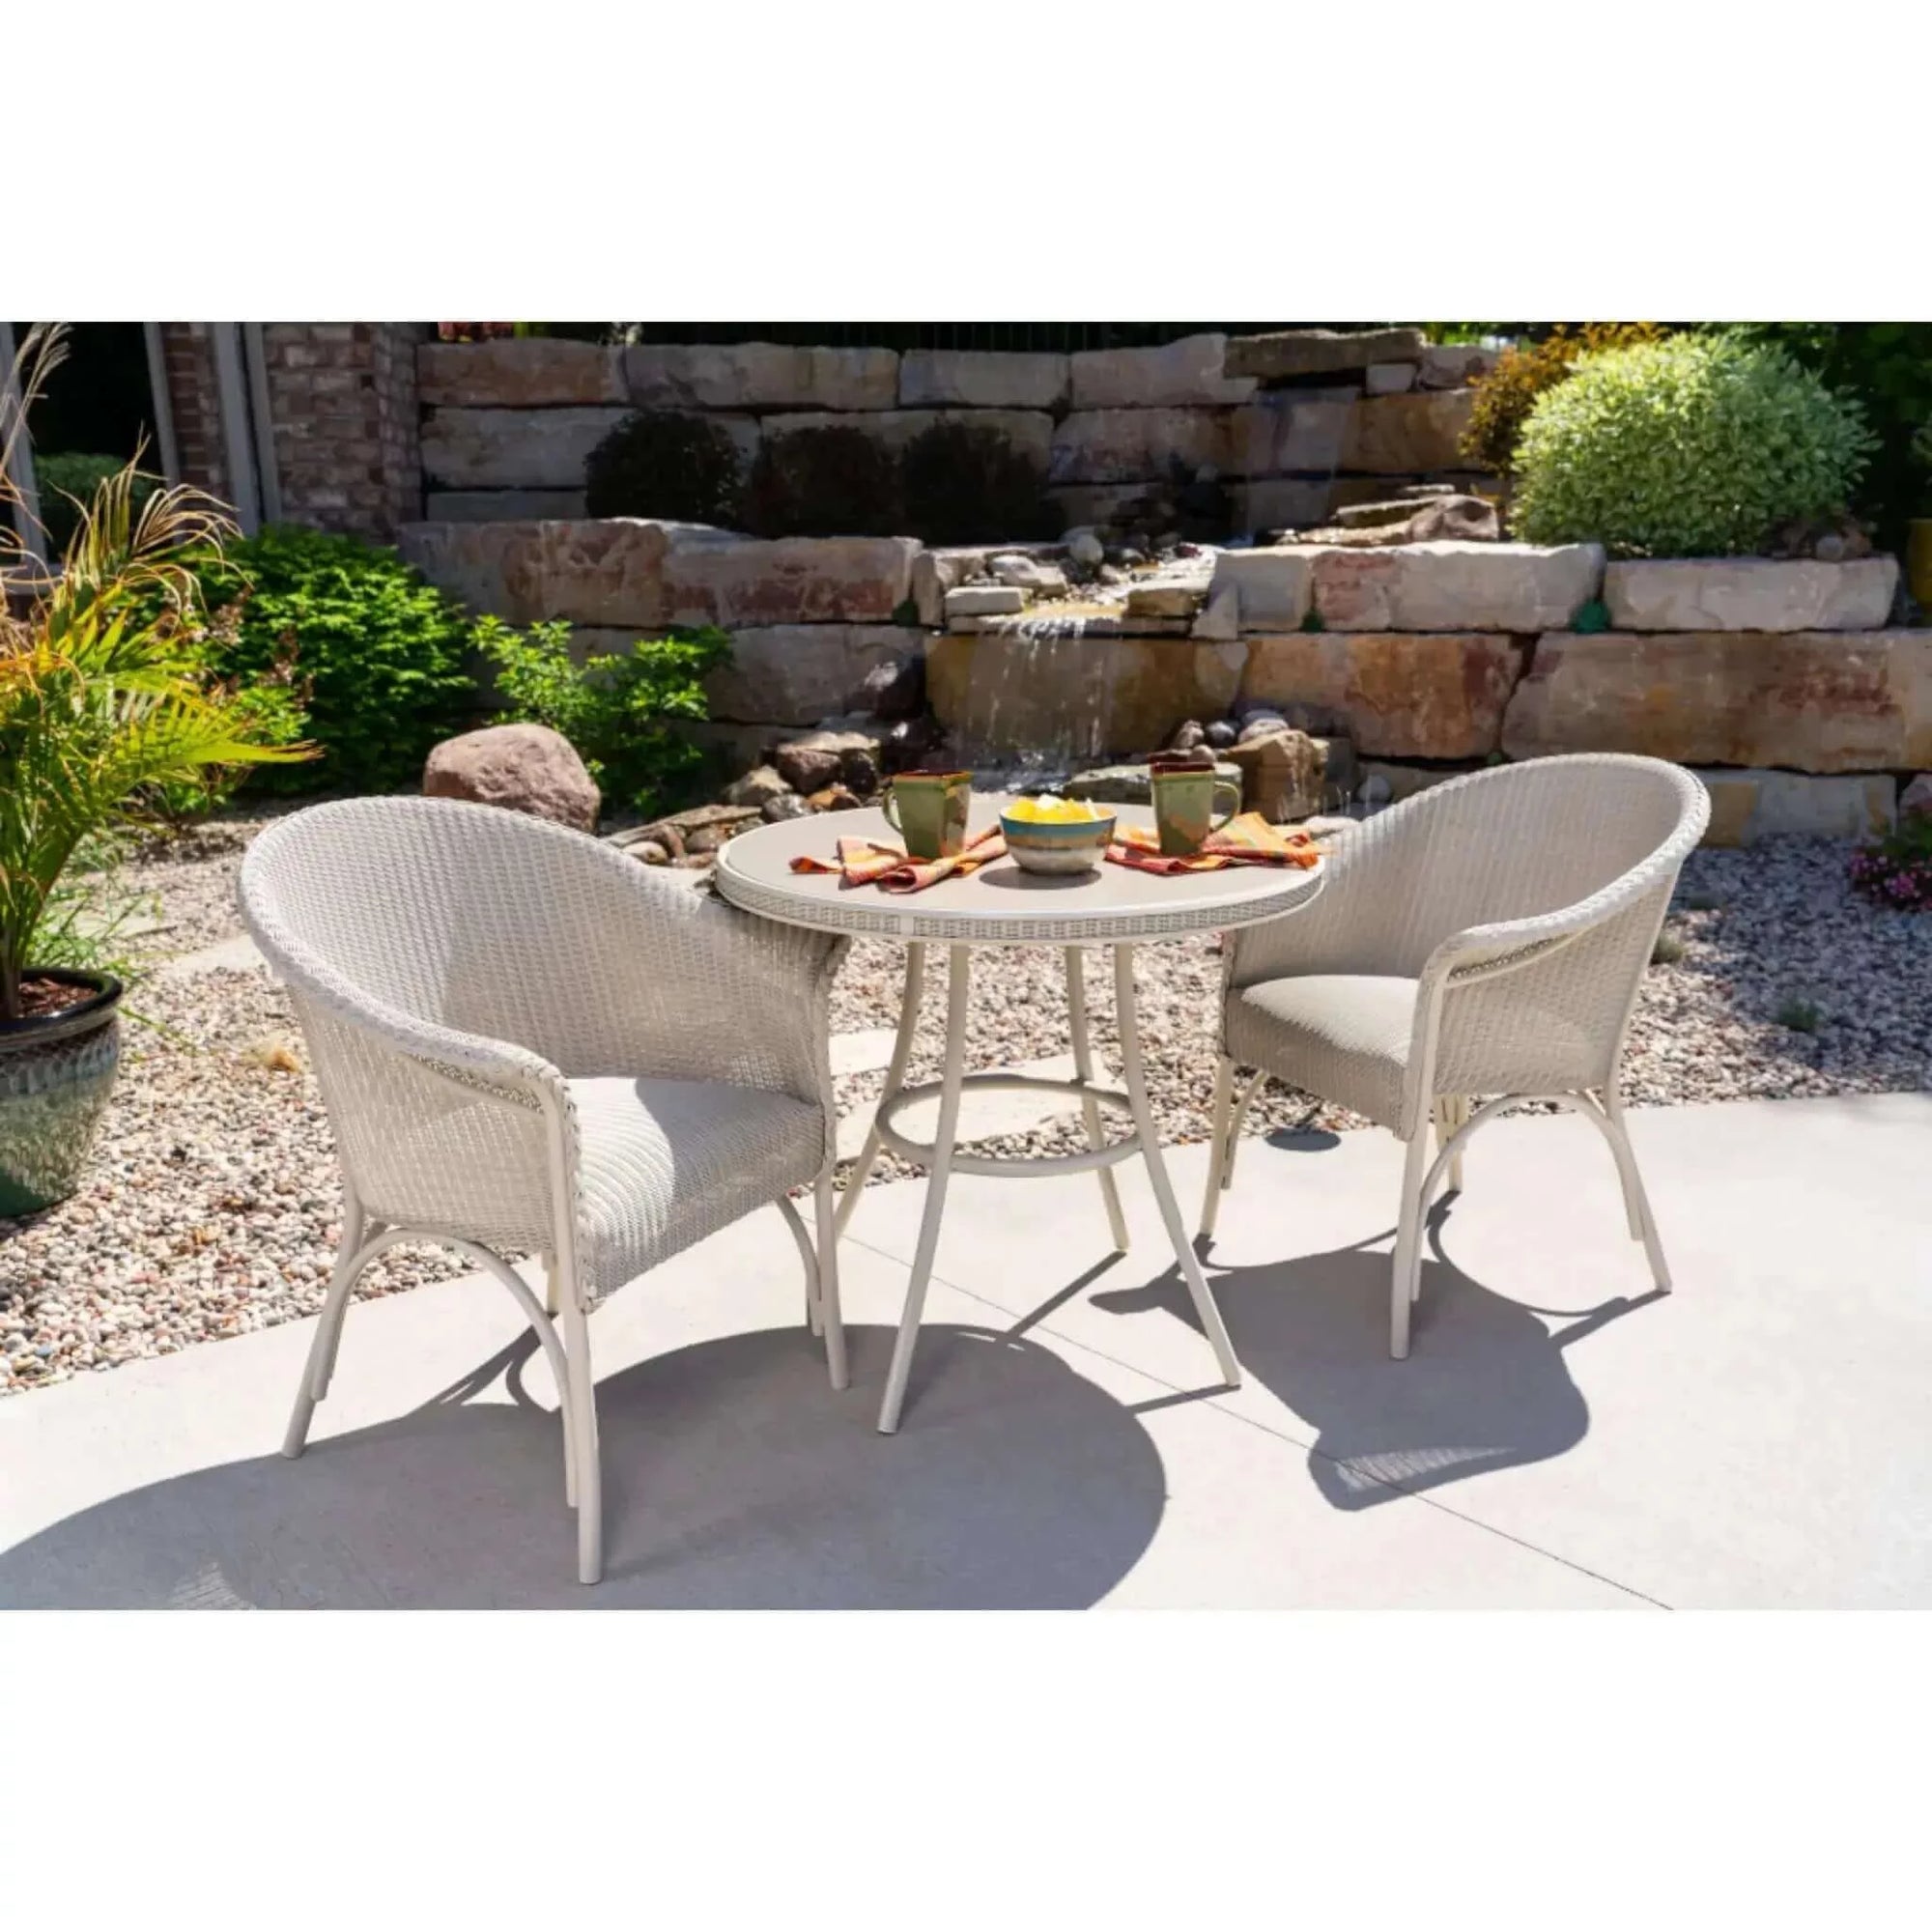 Lloyd Flanders All Seasons 33" Round Bistro Table with Taupe Glass